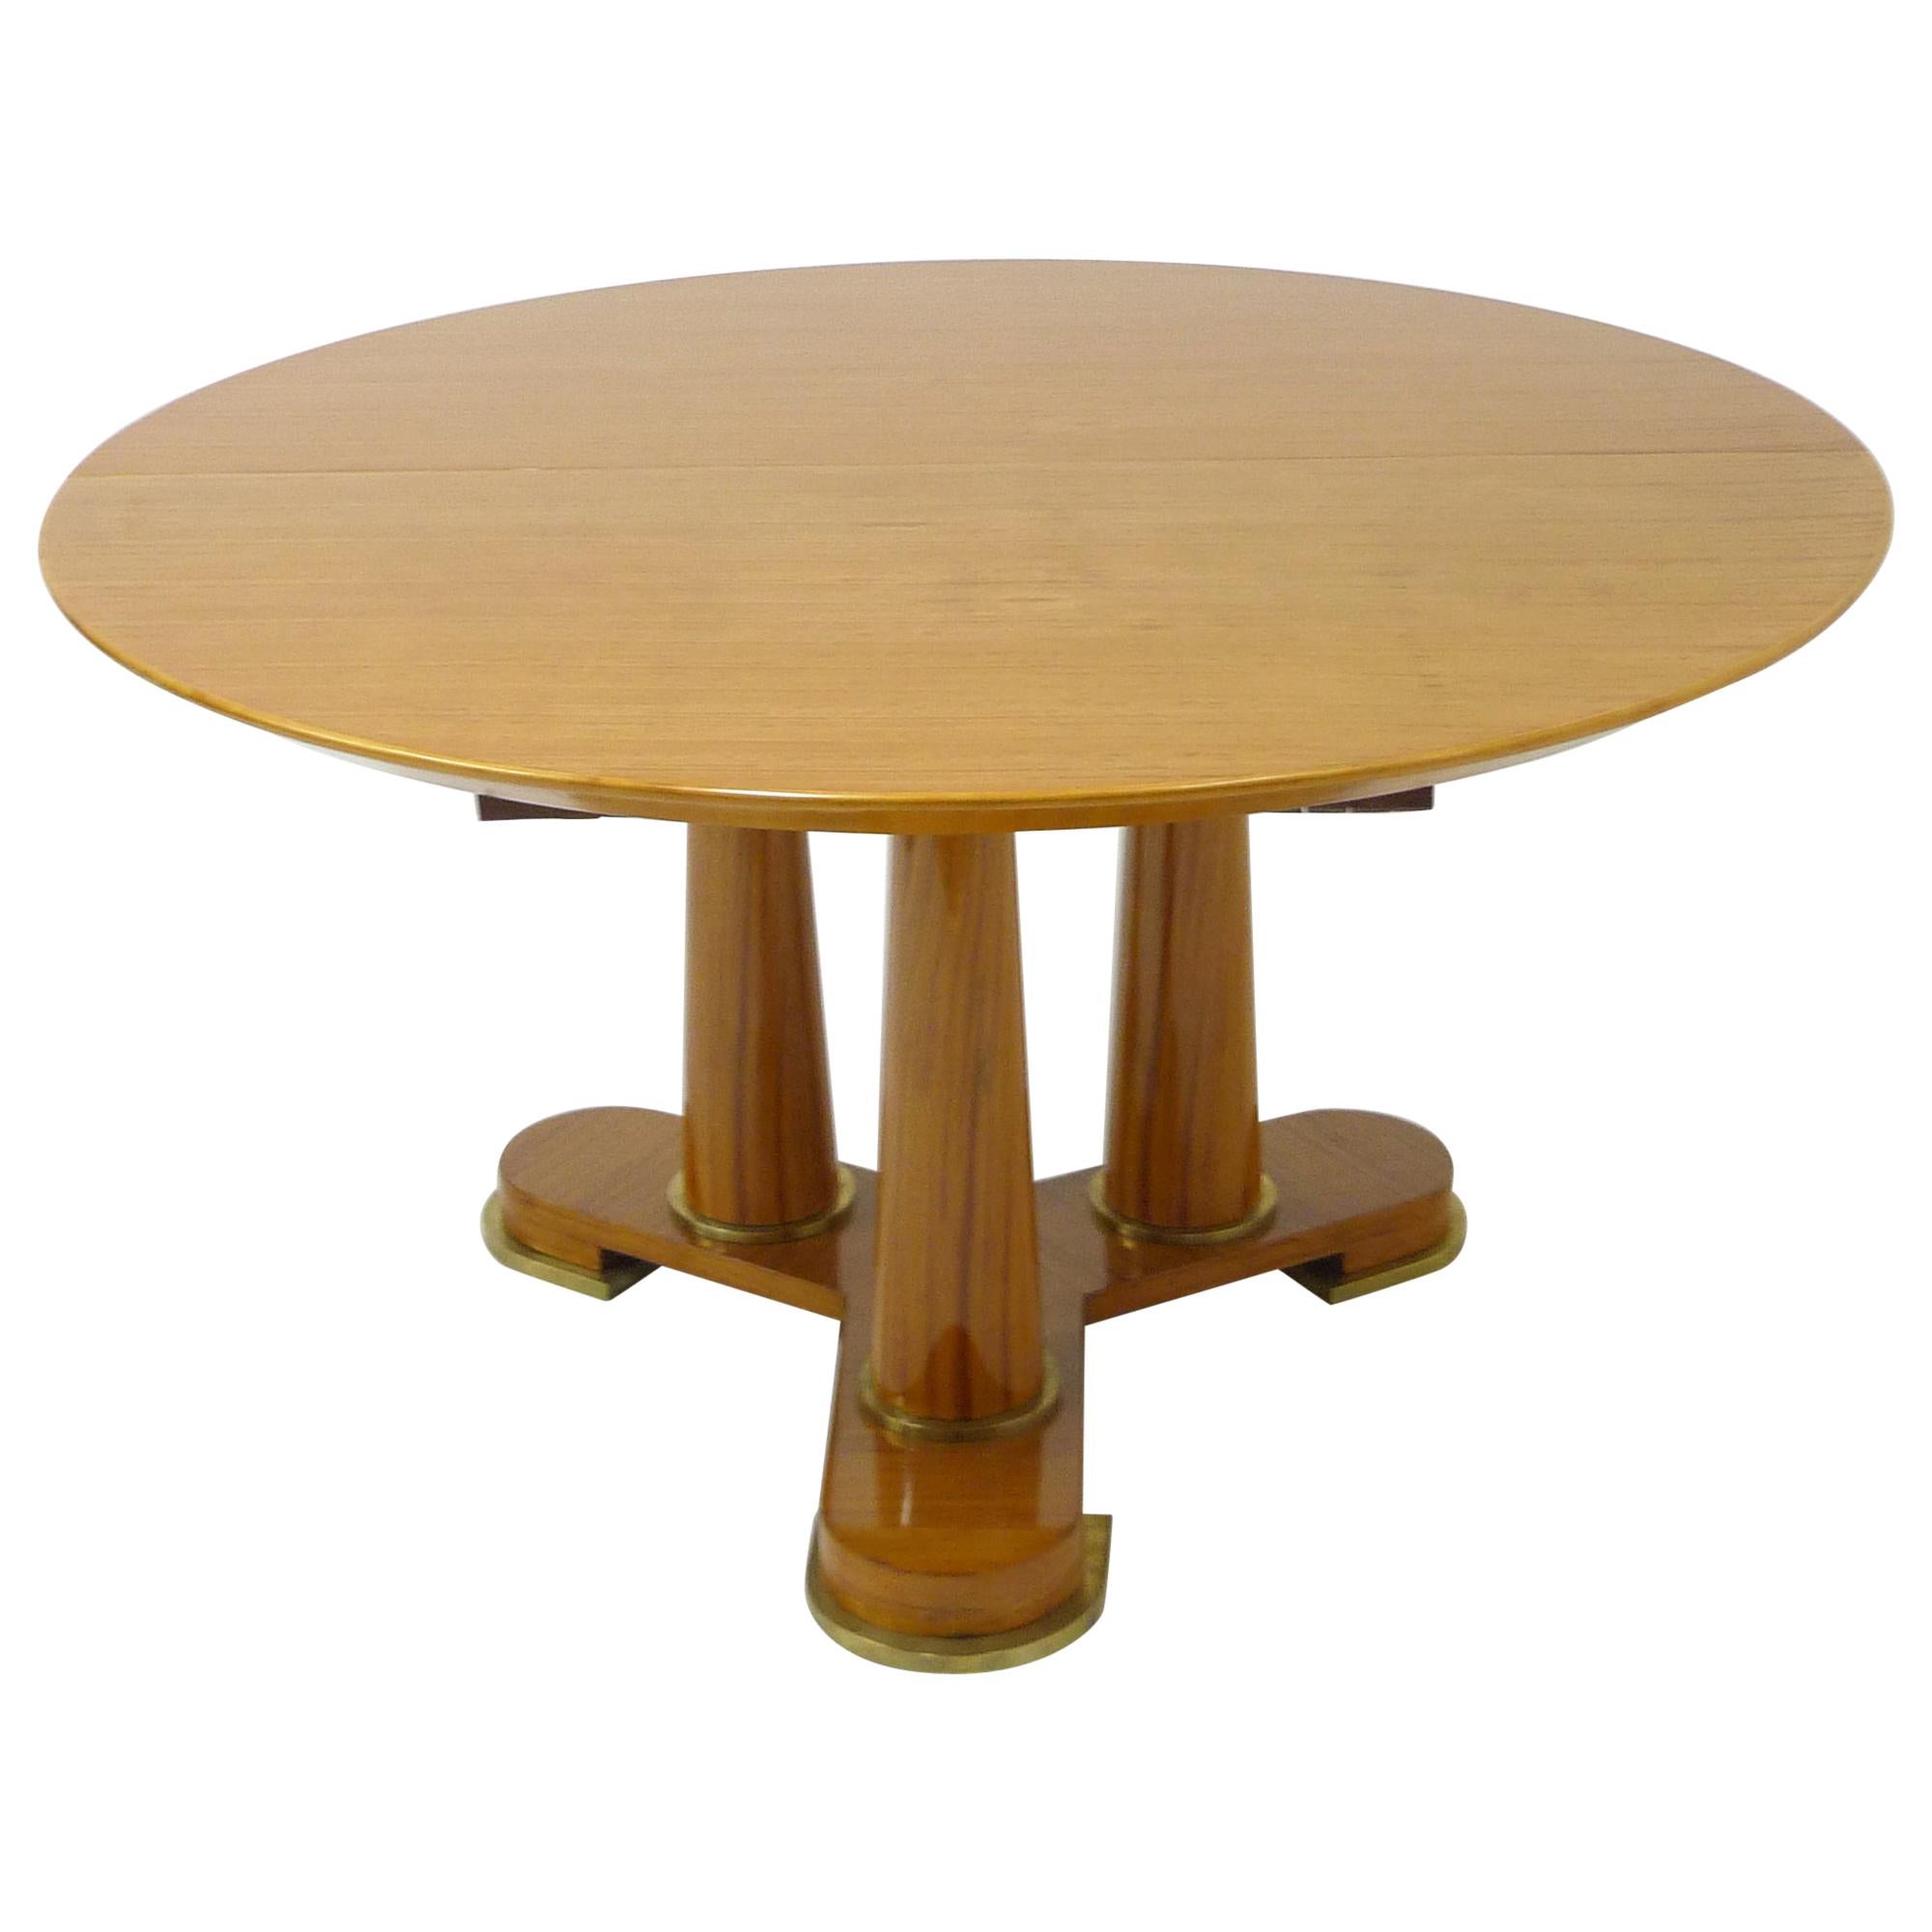 Varnished Lemon-Tree Circular Table by Jean Royère, circa 1950 For Sale